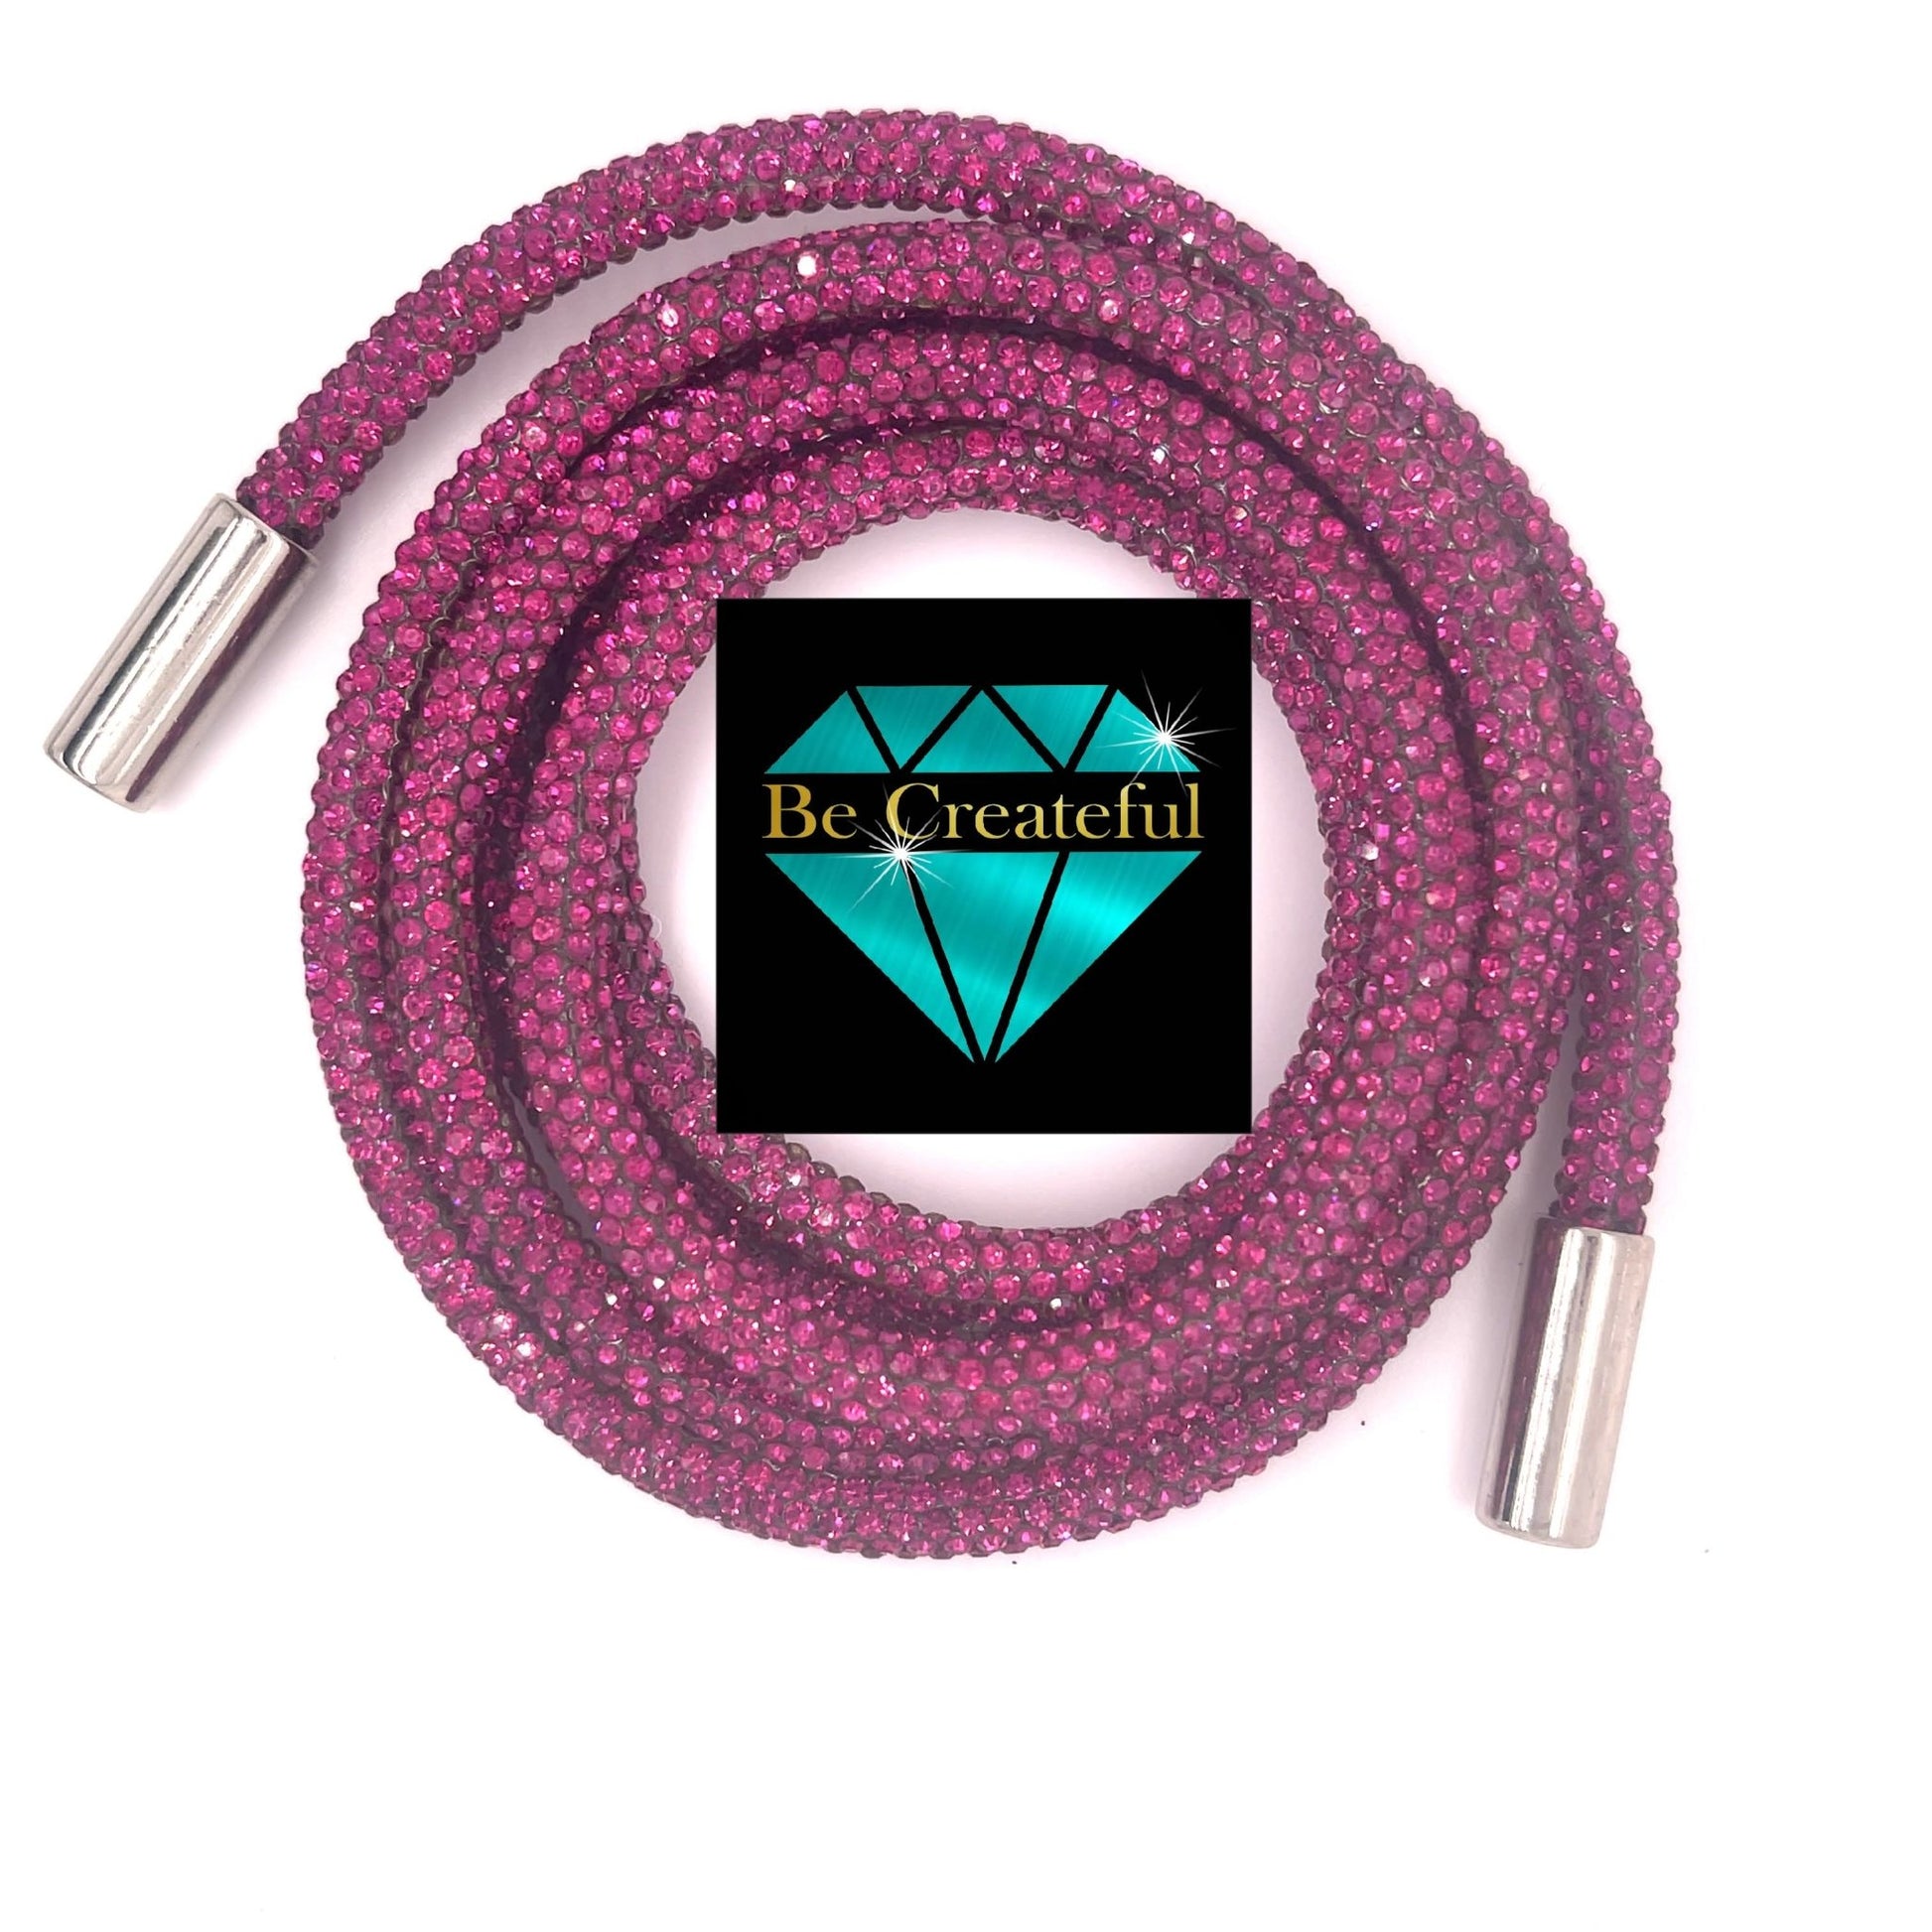 Be Createful Hot Pink Rhinestone Hoodie Strings are the perfect way to glam up your favorite hoodie and accessories!